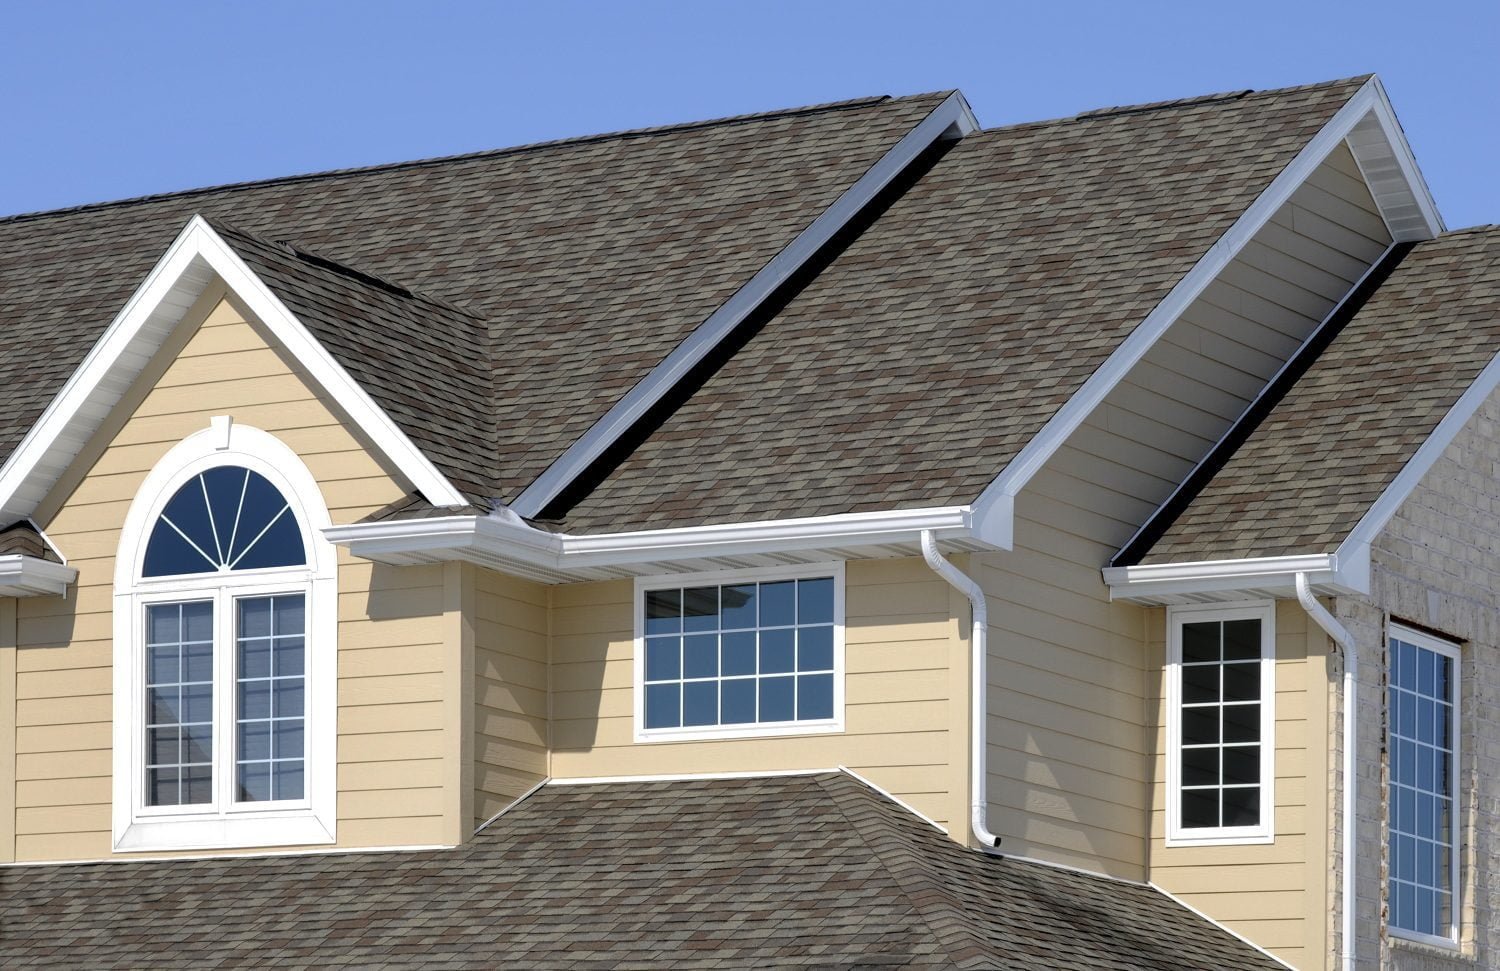 Should You Repair, Patch or Replace Your Asphalt Shingle Roof